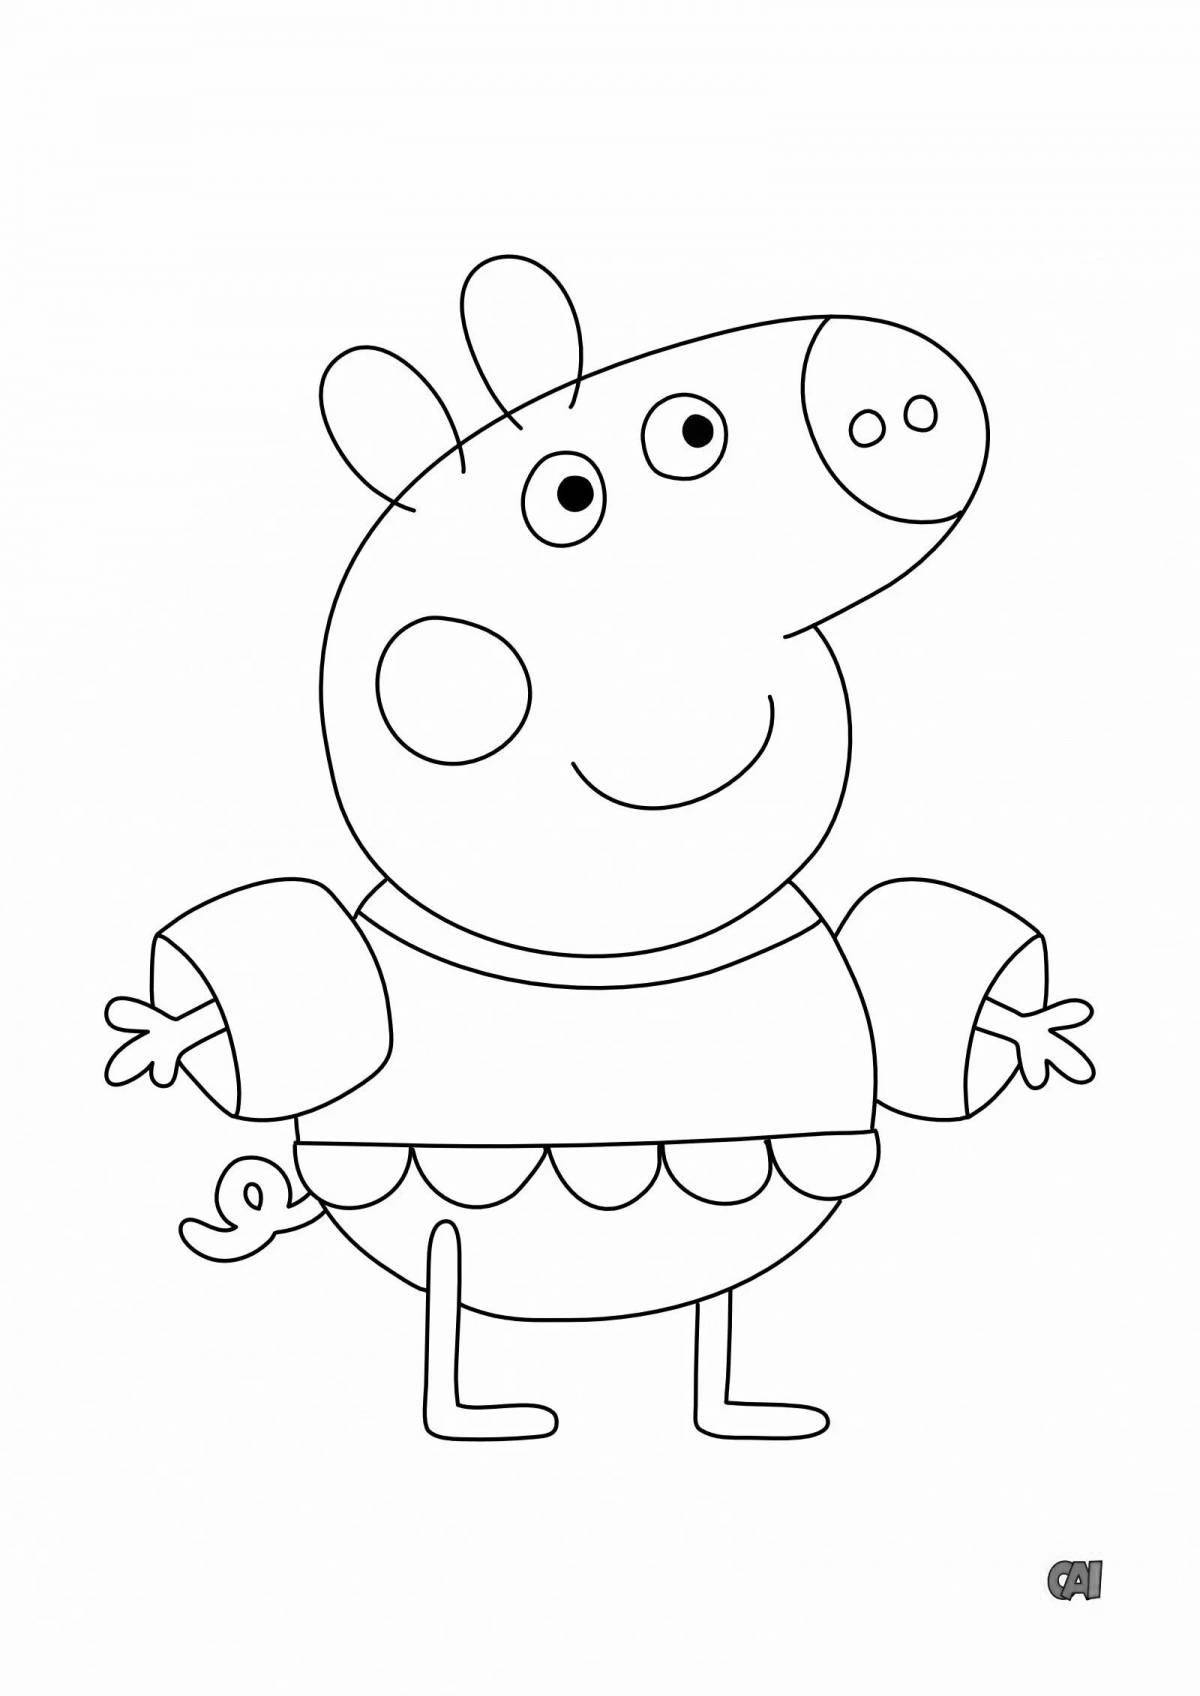 Amazing peppa pig frog coloring page